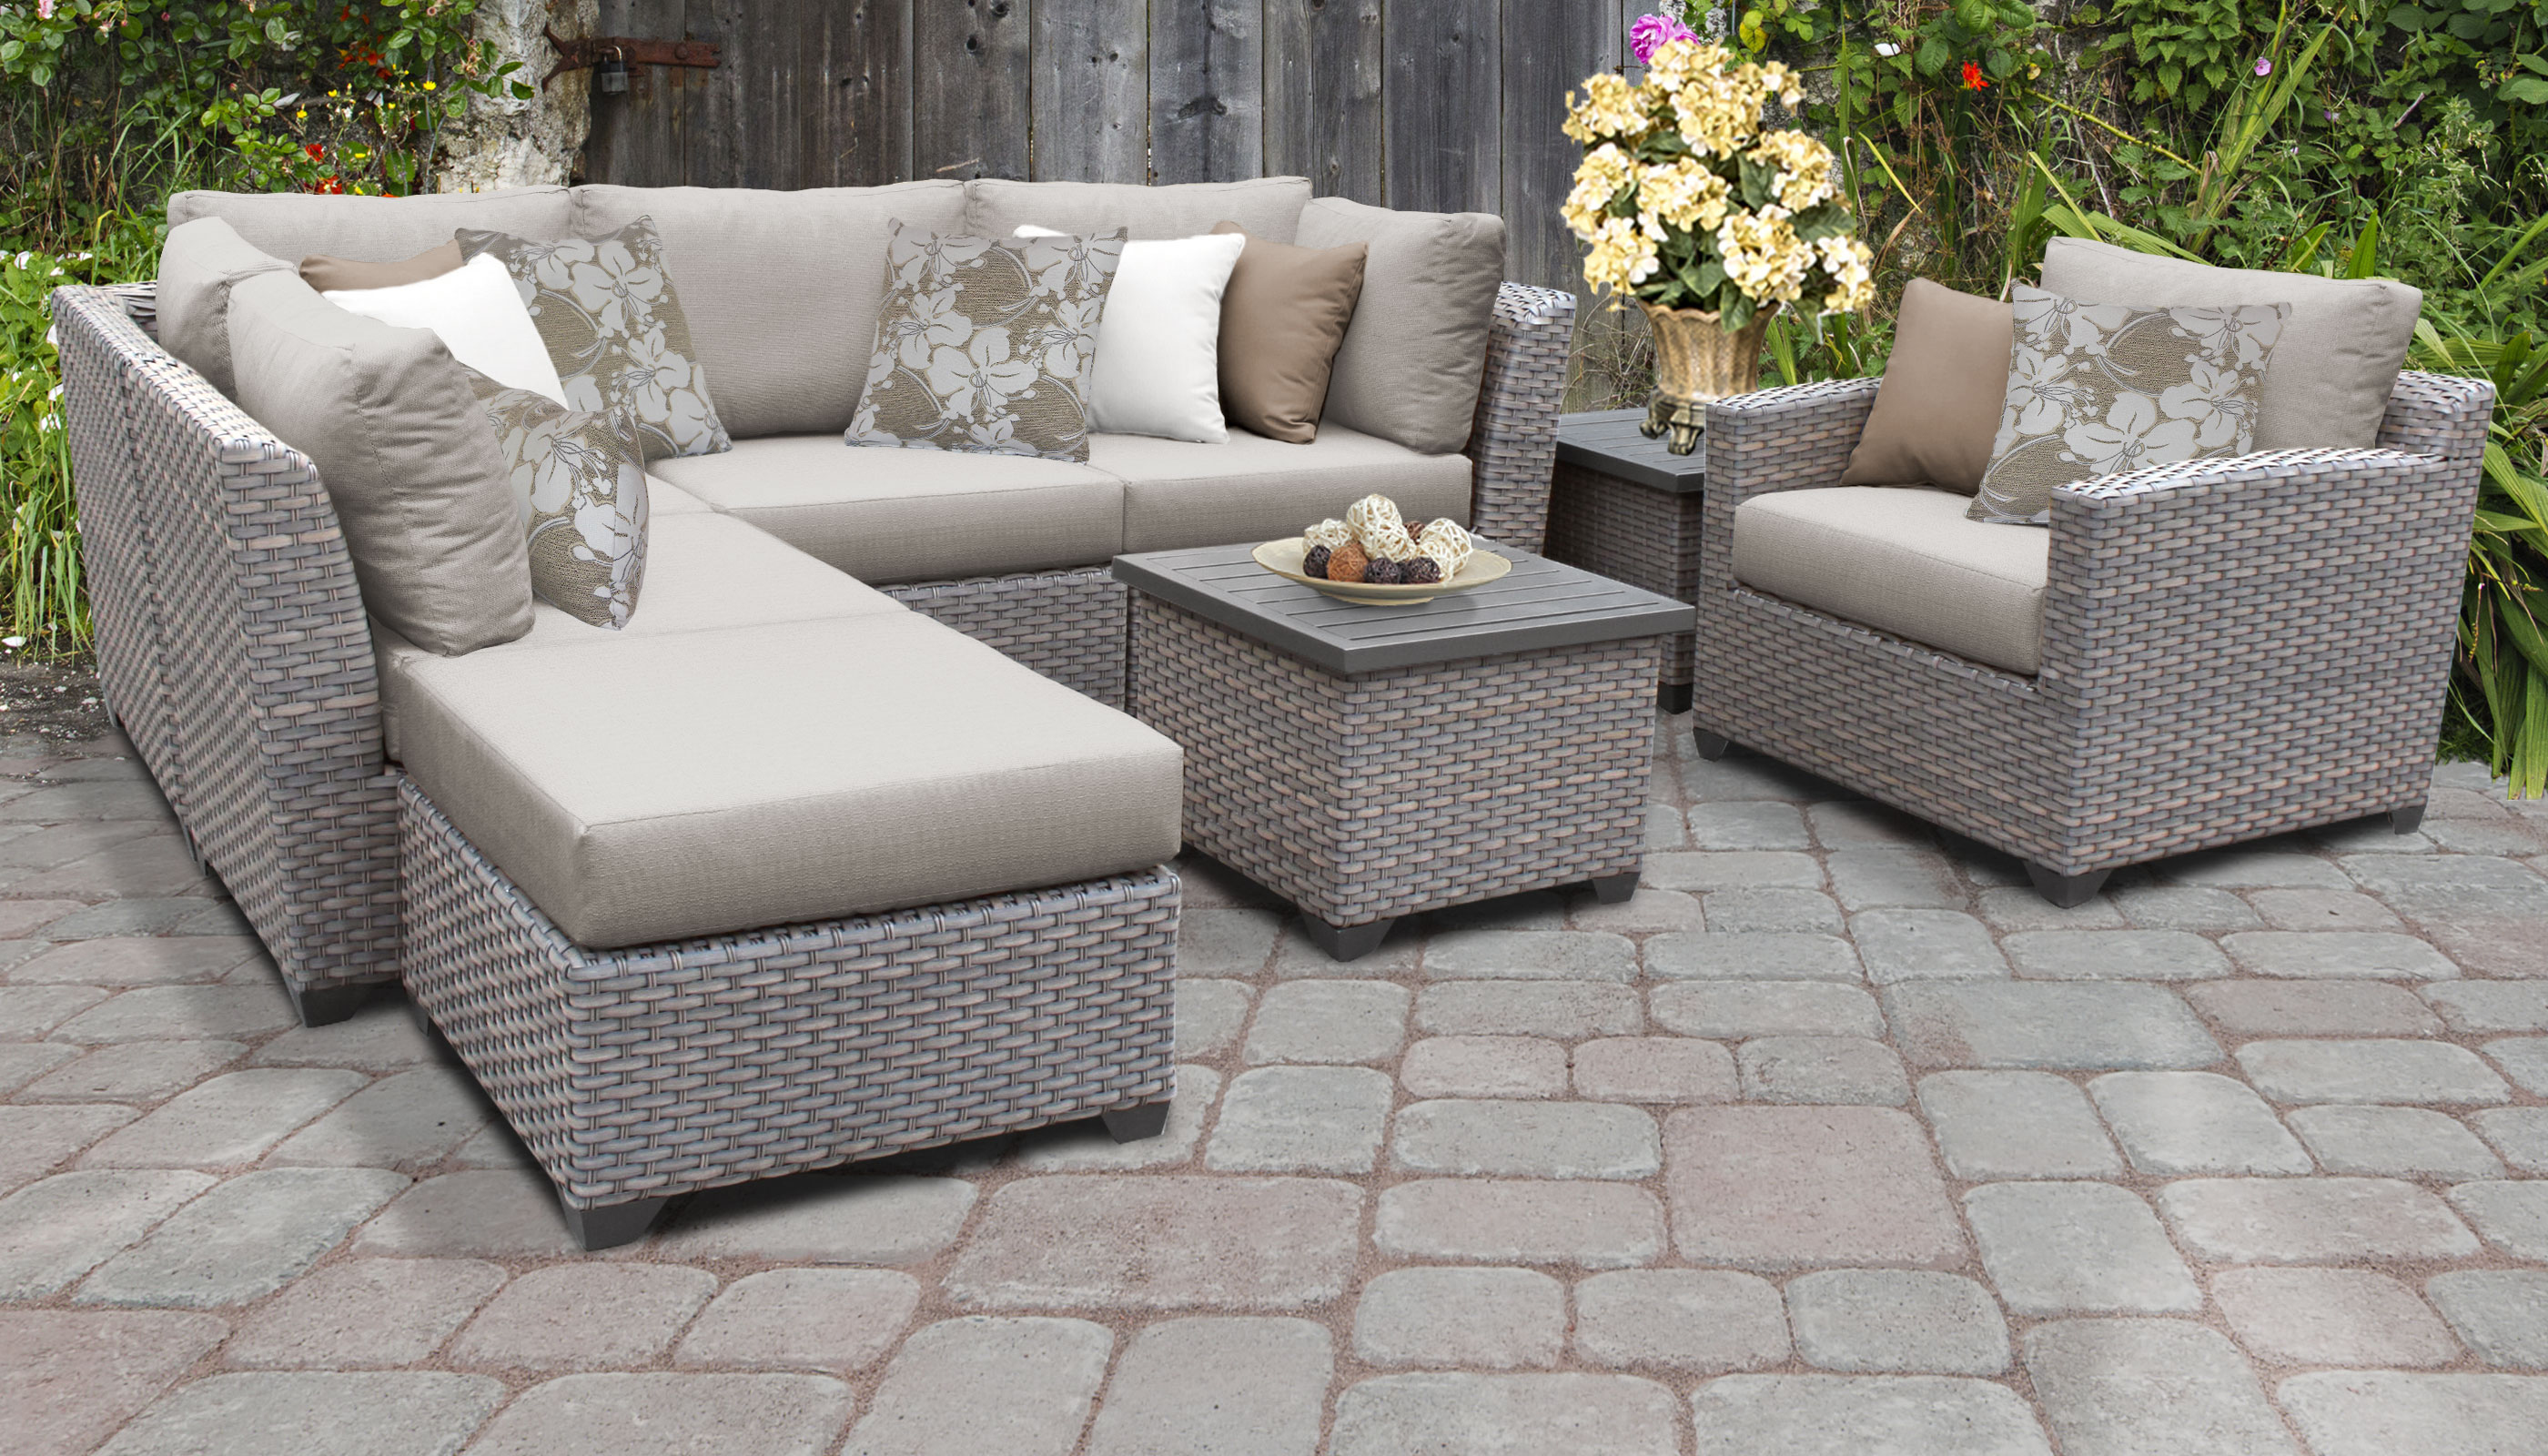 TK Classics Florence Wicker 8 Piece Patio Conversation Set with End Table and 2 Sets of Cushion Covers - image 1 of 11